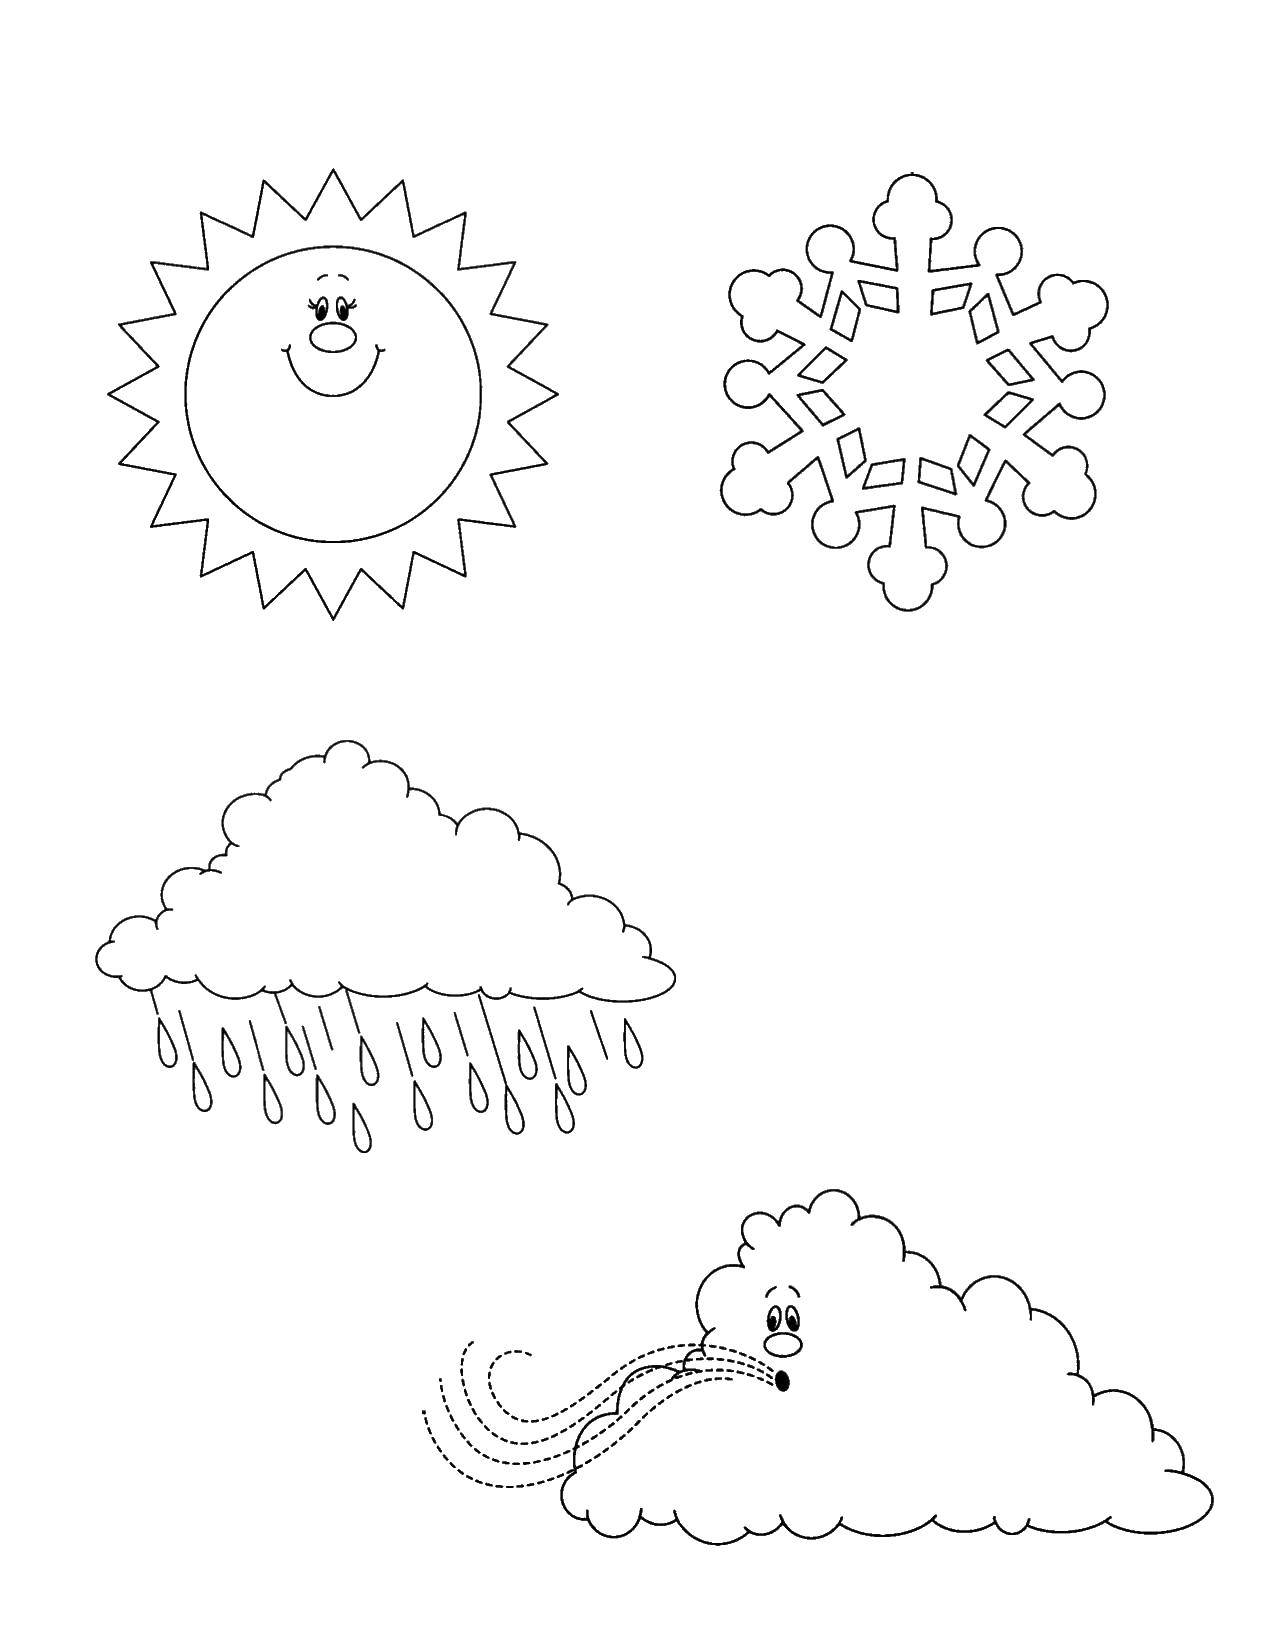 Coloring The signs of the weather. Category Weather. Tags:  weather.